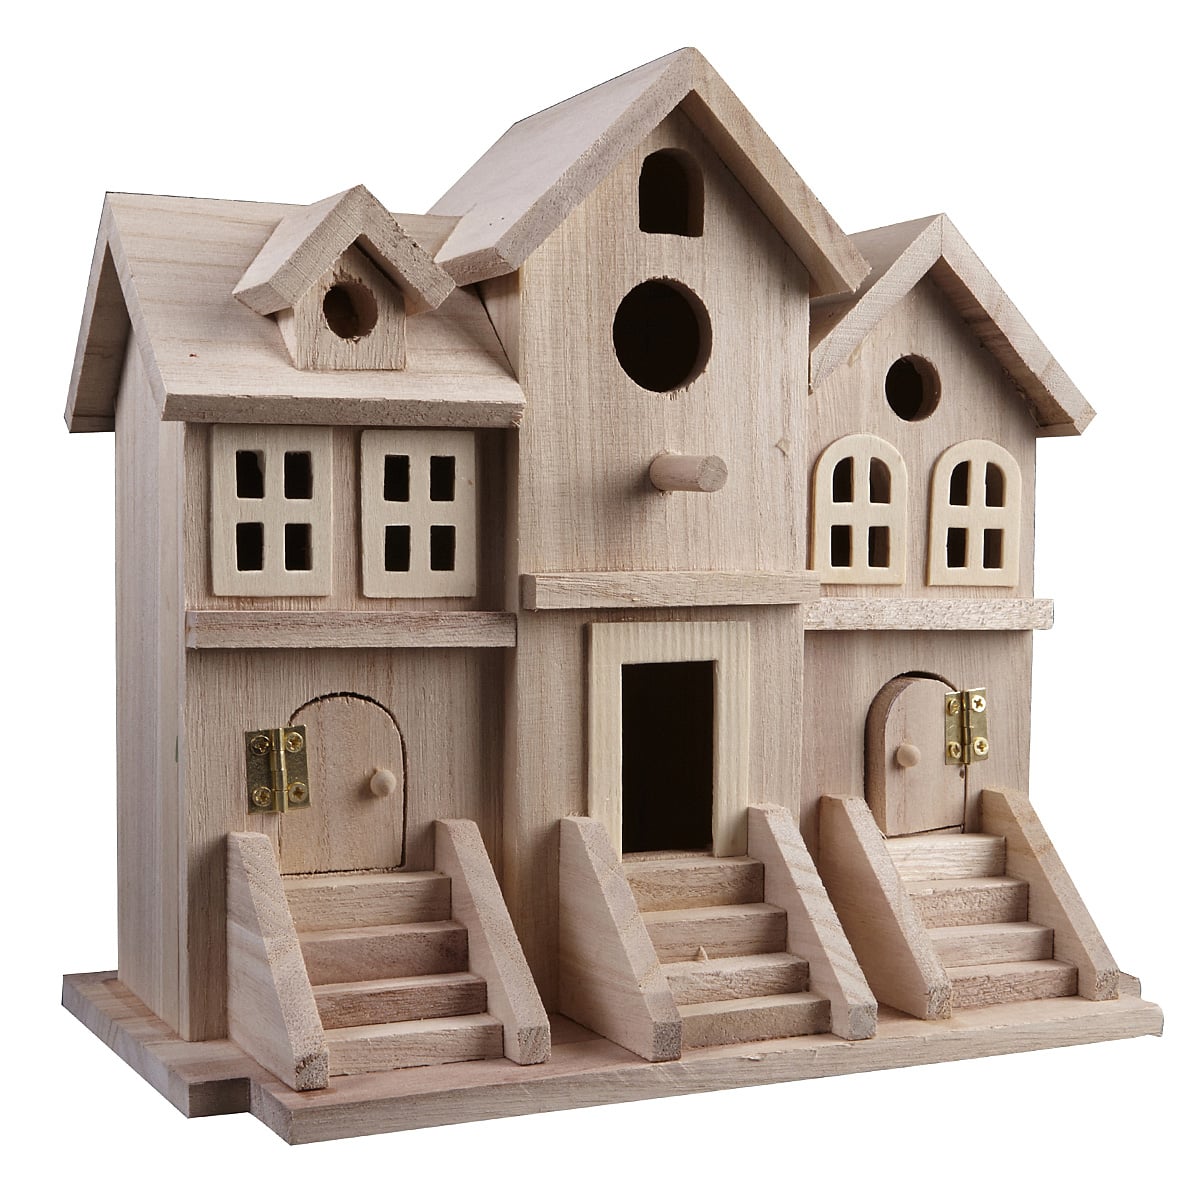 Brownstone Birdhouse By ArtMinds®